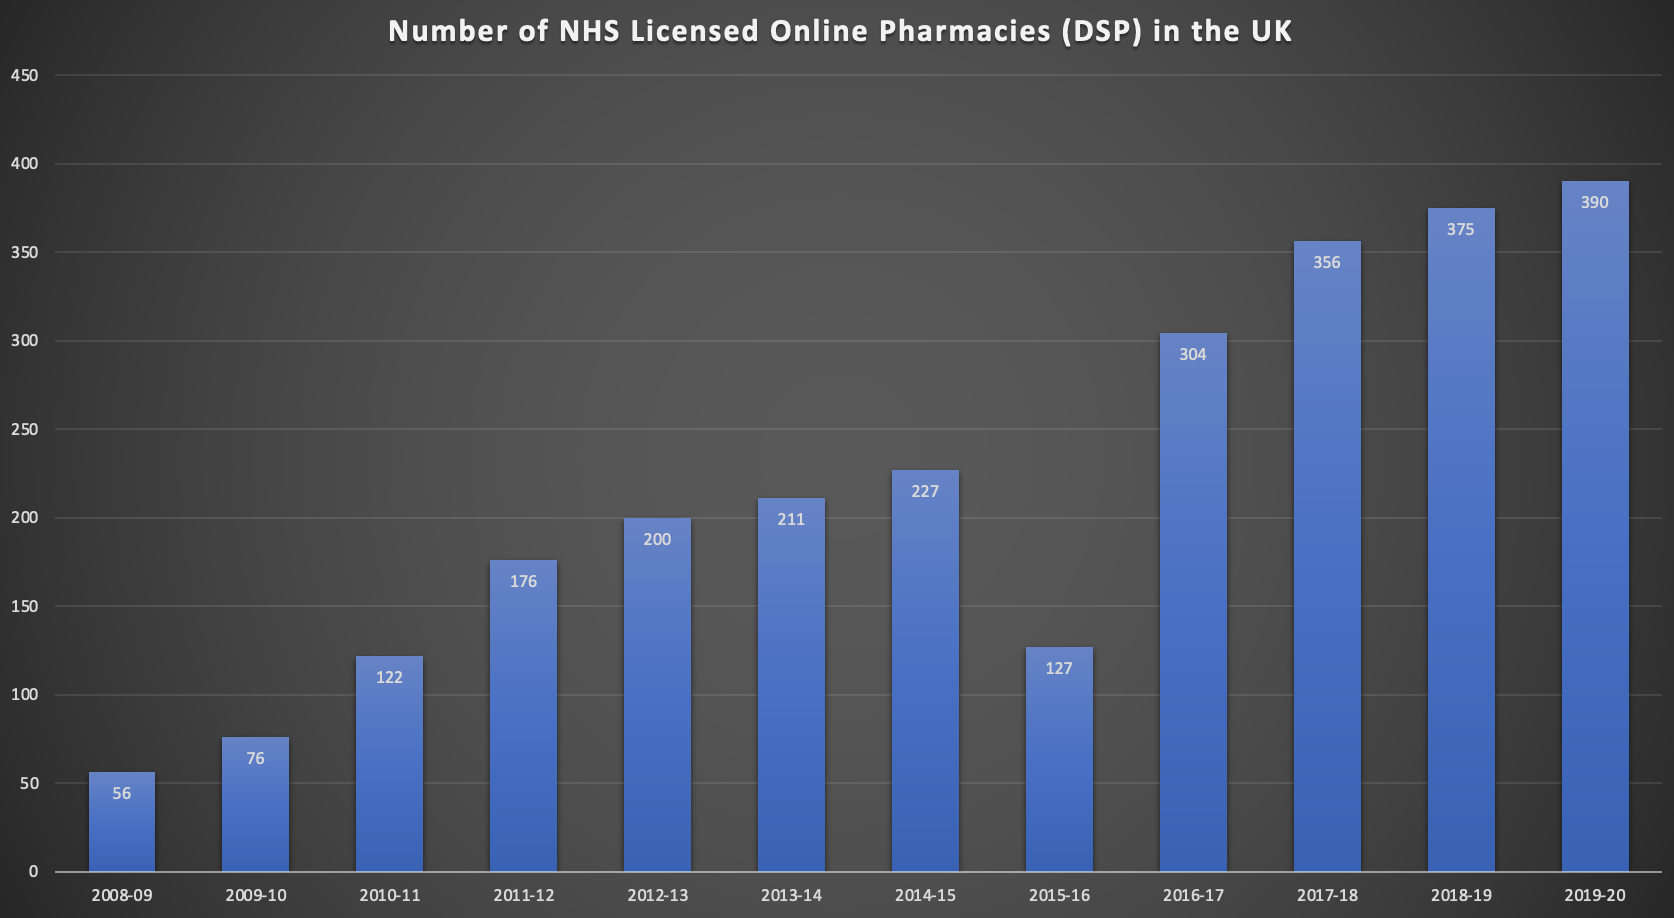 Number of DSPs in the UK